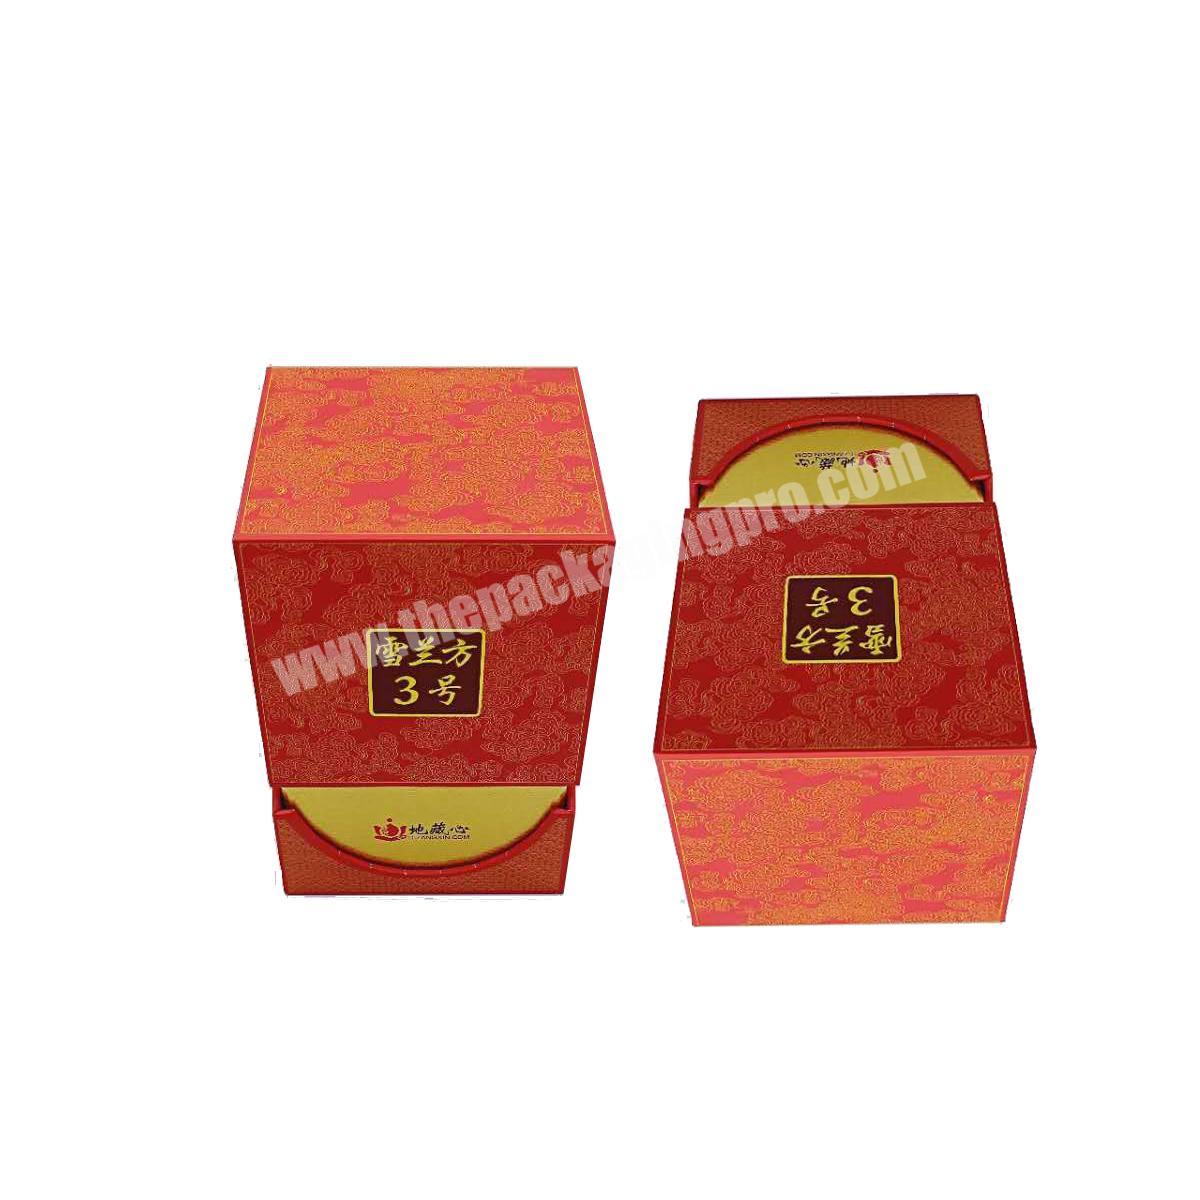 Cosmetics hinged clamshell package cardboard gift box boxes with lid manufacturer